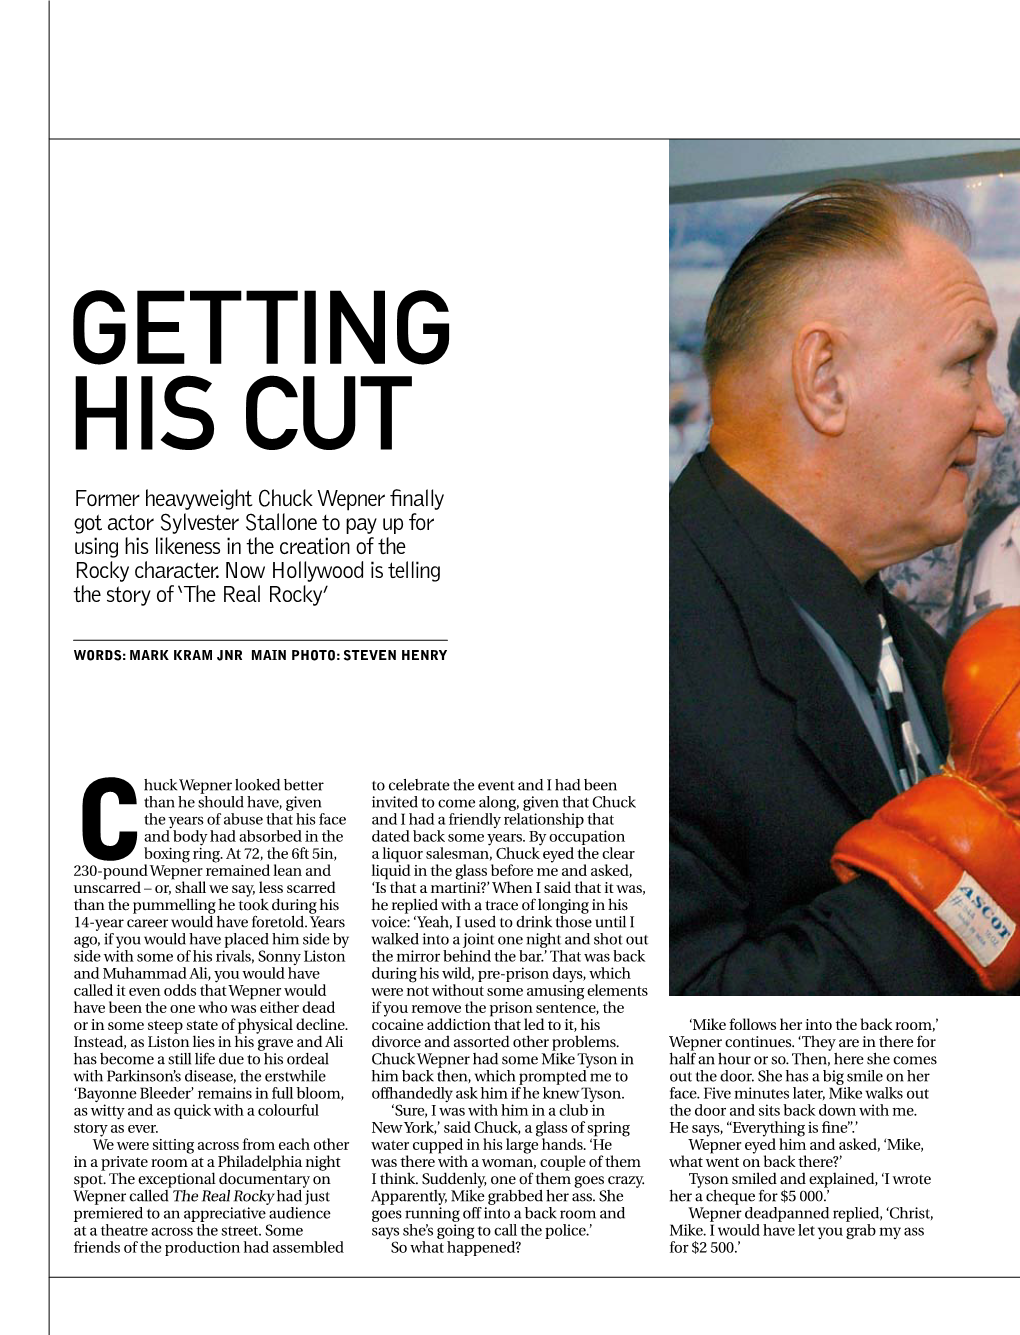 GETTING HIS CUT Former Heavyweight Chuck Wepner Finally Got Actor Sylvester Stallone to Pay up for Using His Likeness in the Creation of the Rocky Character